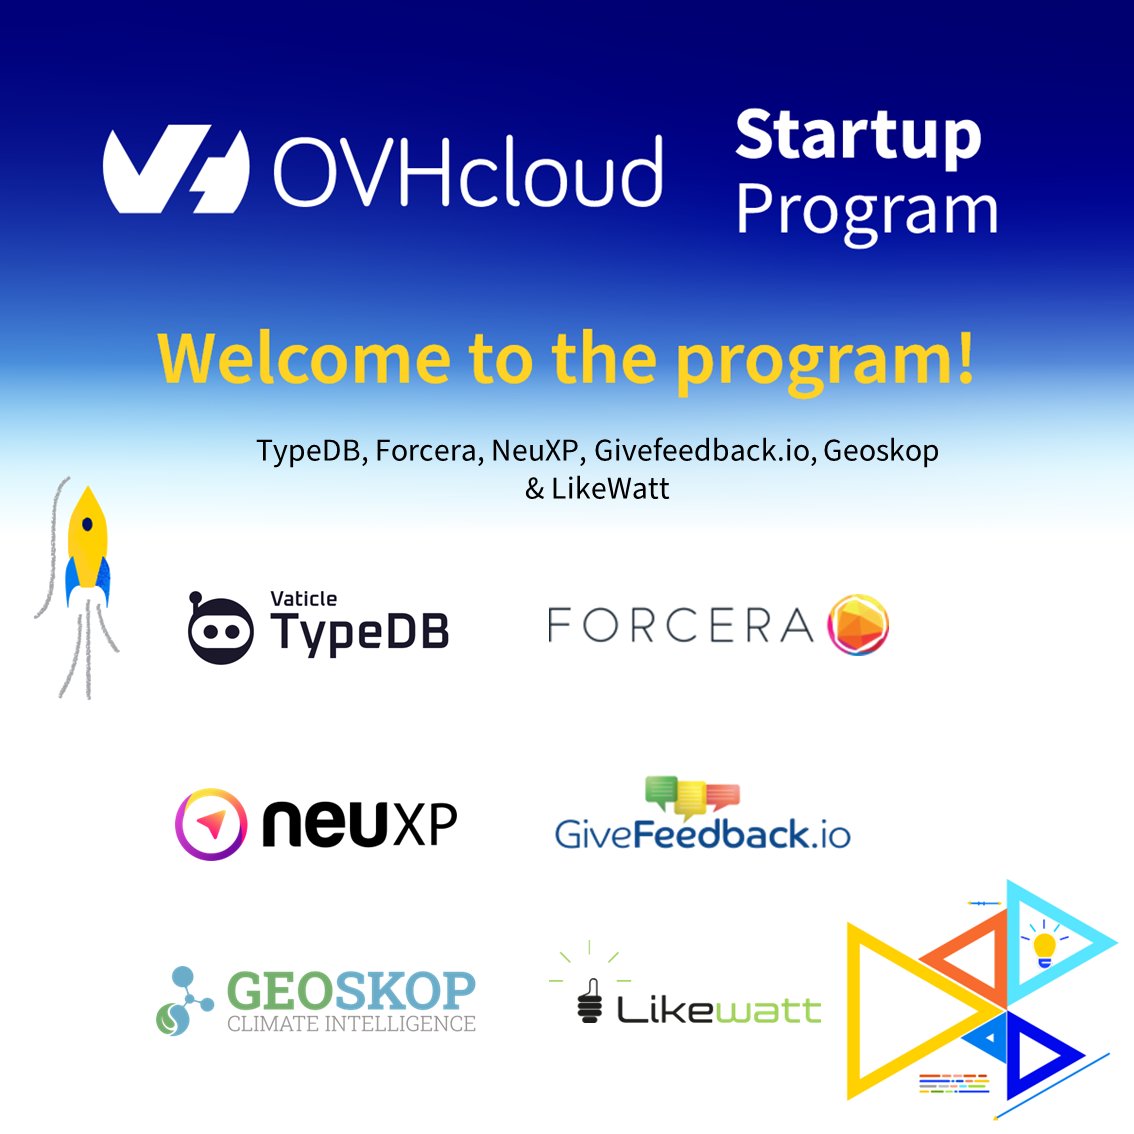 🚀 Exciting times ahead! Thrilled to spotlight 6 incredible #startups revolutionizing their fields with @OVHcloudStartup Program: ⚡️@Likewatt_fr 💪#FORCERA 📢#Givefeedback 🌍#NeuXP Group 🧠@TypeDB_ 🌏#Geoskop Learn more about our program here: ovh.to/RLzqL5P